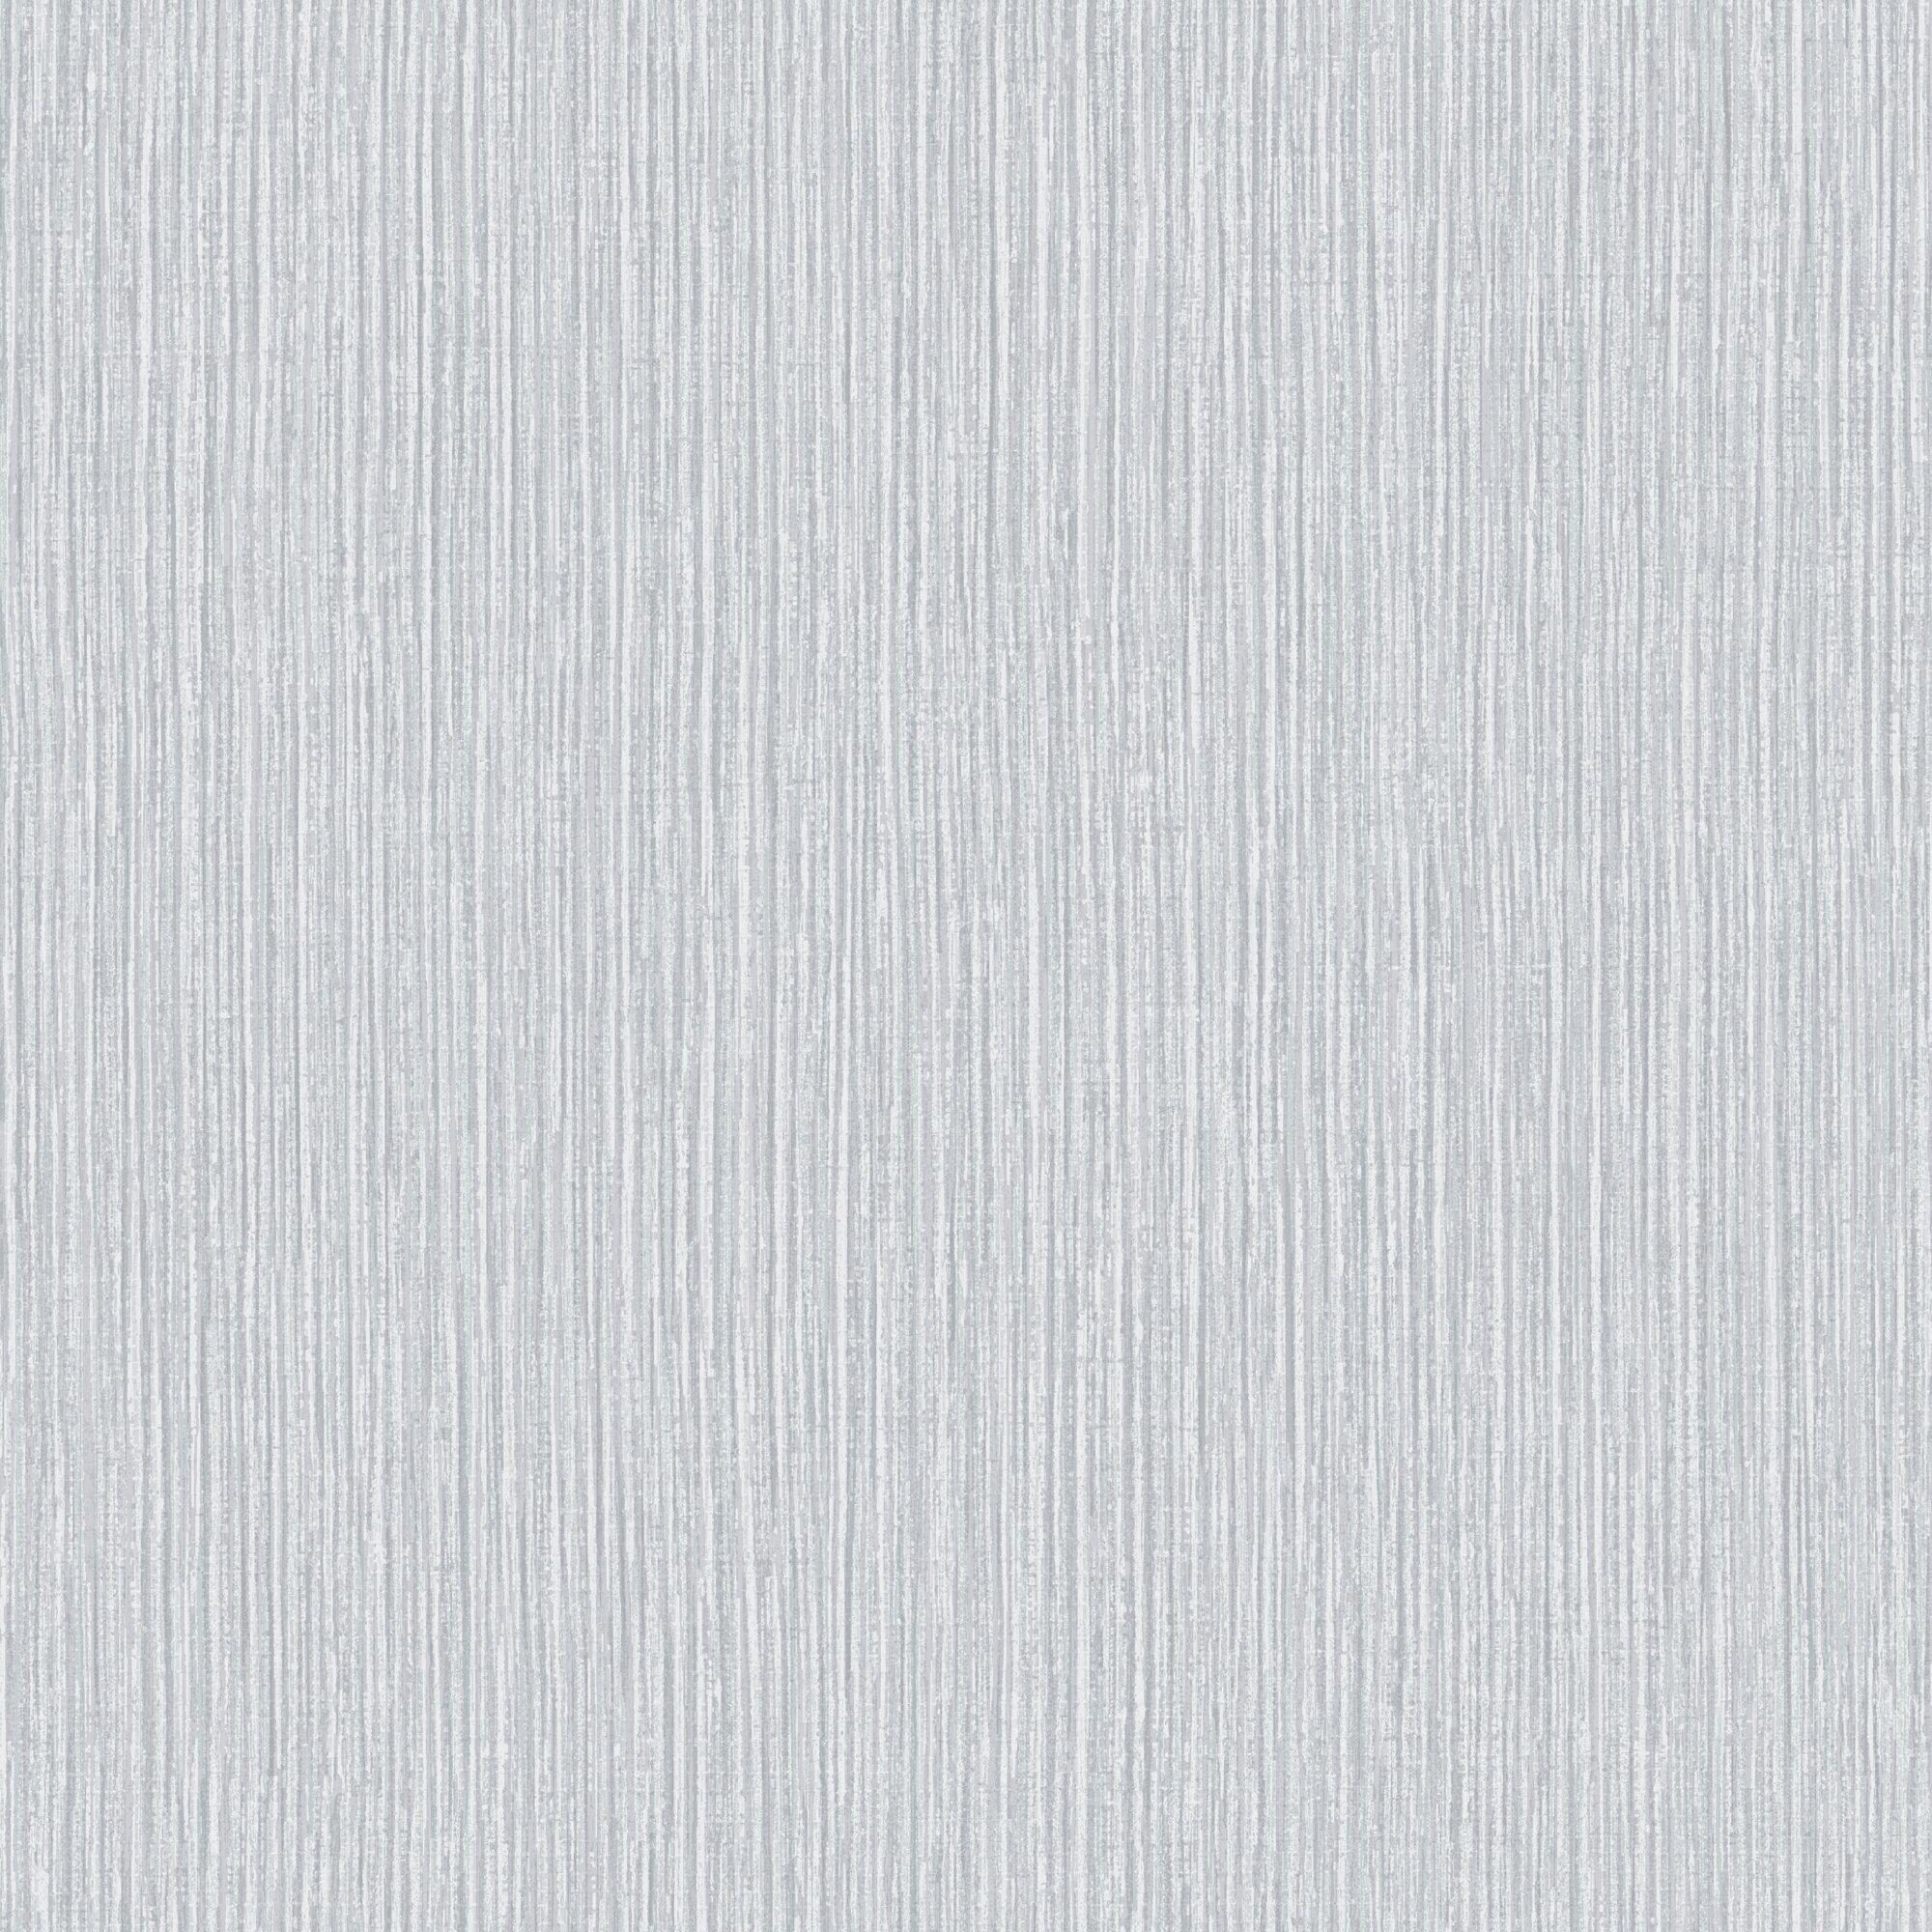 Silver And White Wallpaper | vlr.eng.br